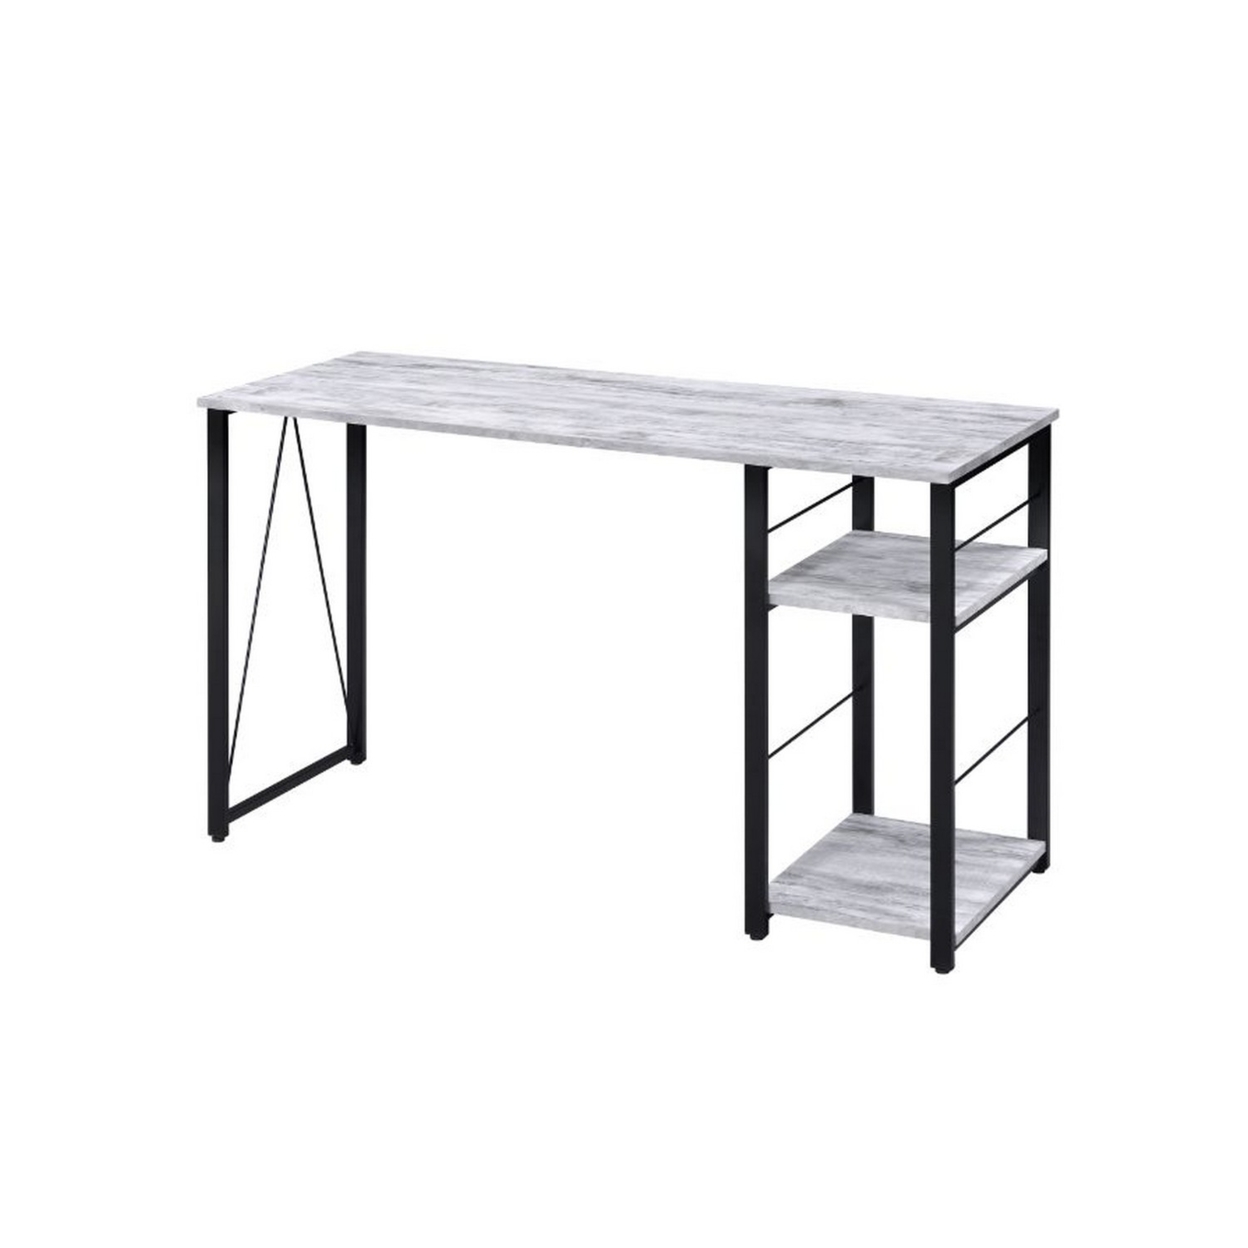 Writing Desk With Rustic Wood Finish, Antique White And Black- Saltoro Sherpi